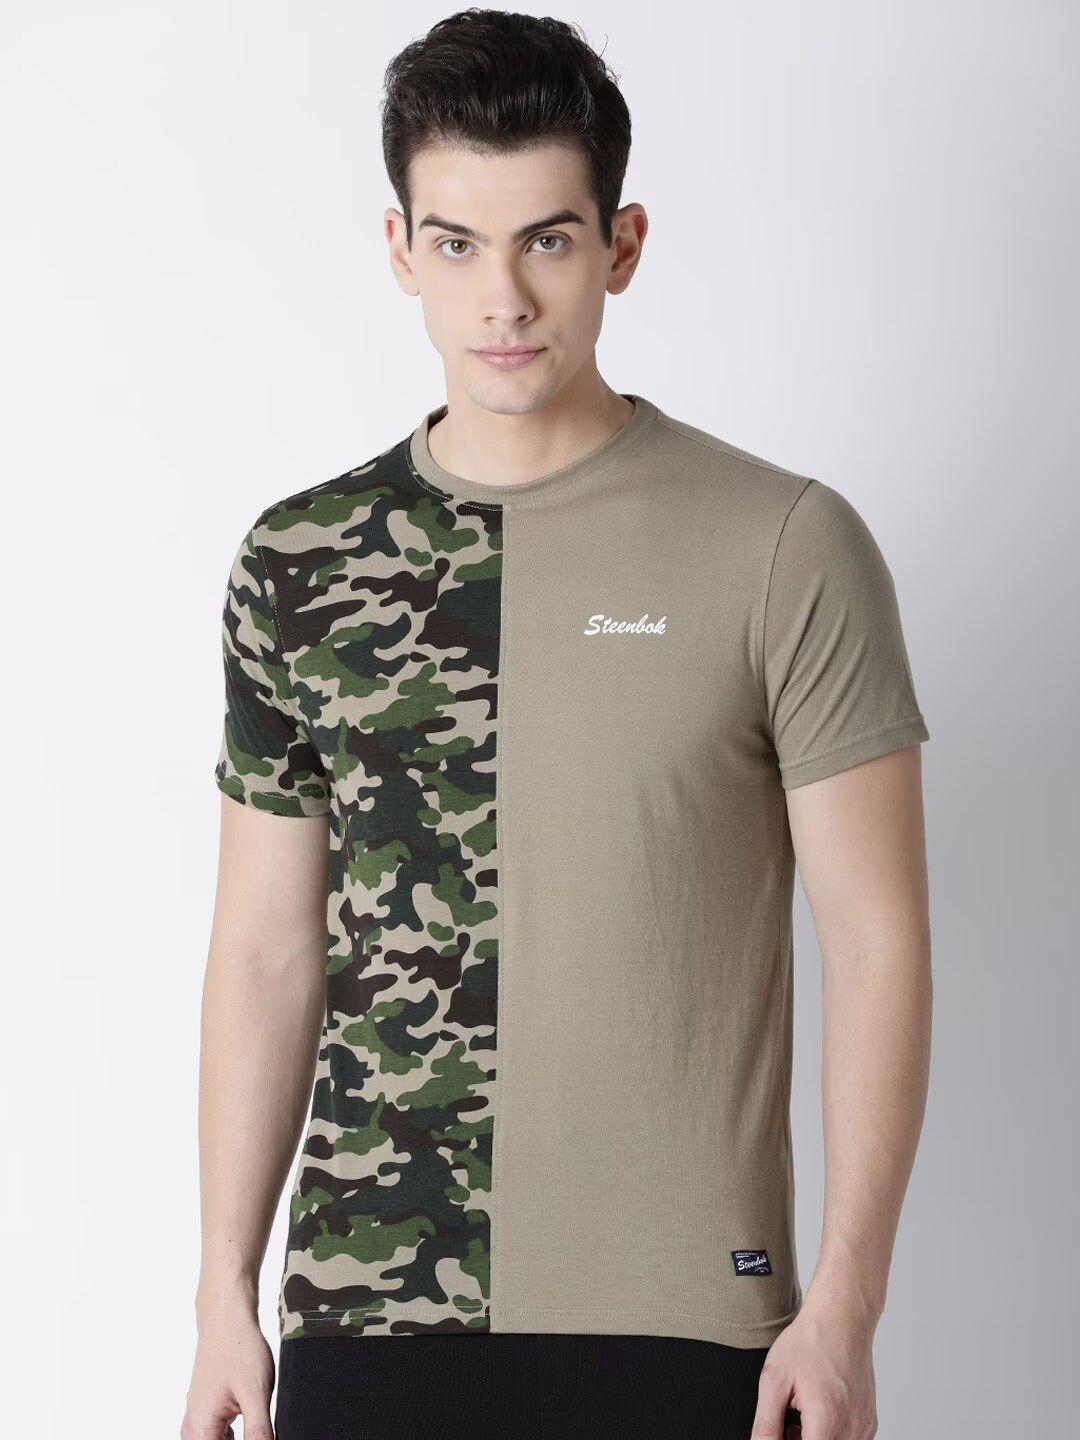 steenbok camouflage printed slim fit cotton t-shirt